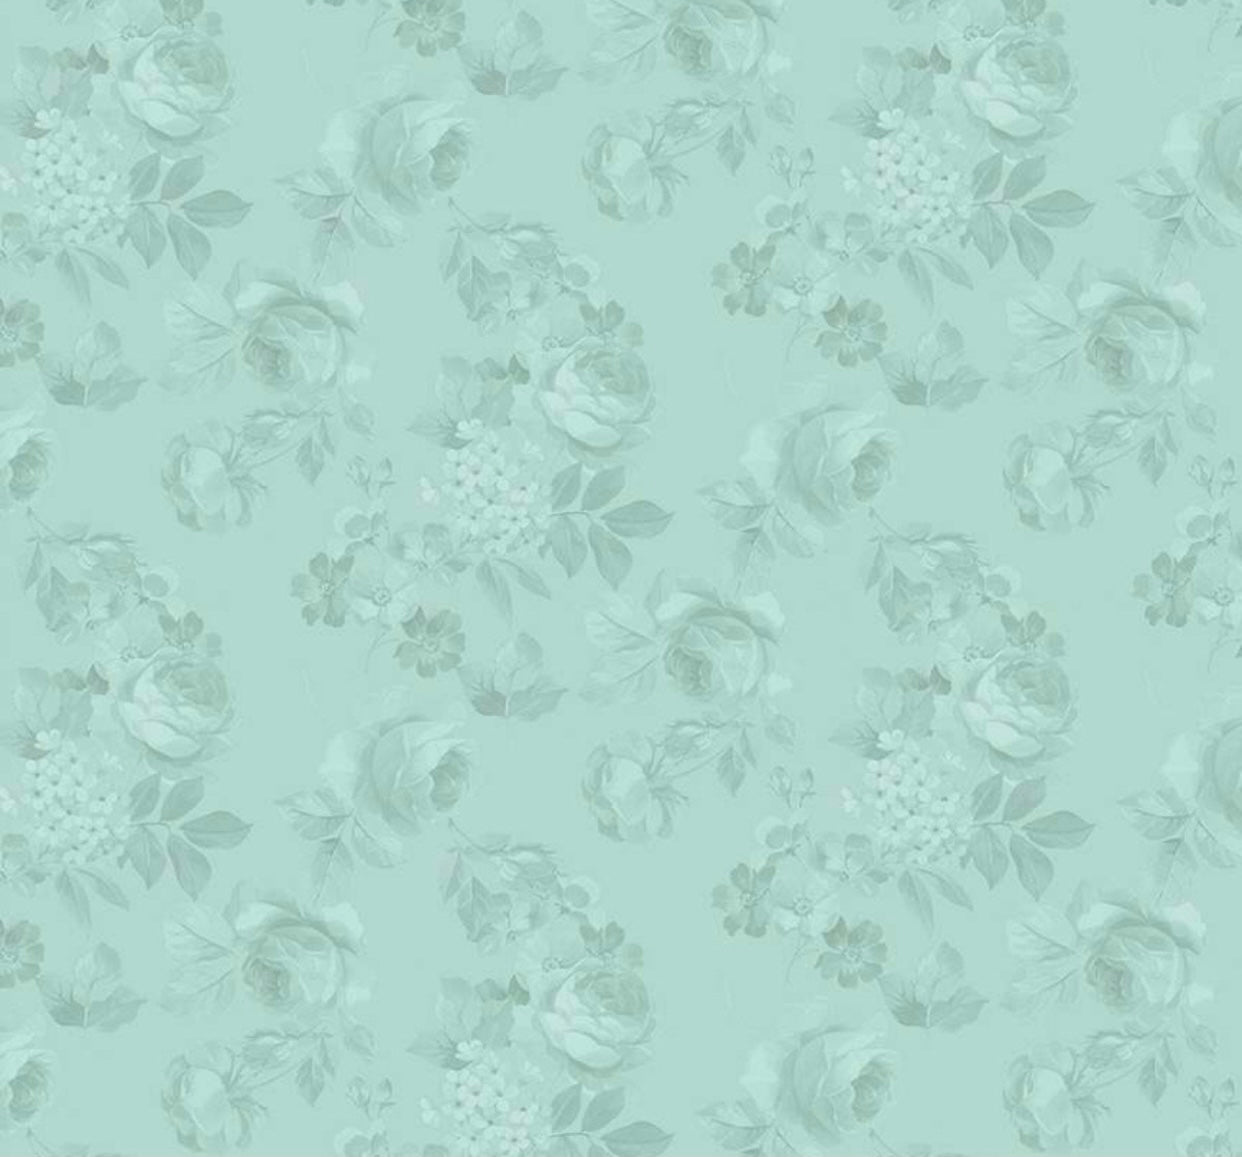 Rose & Violet`s Garden fabric. Faded Roses in Songbird